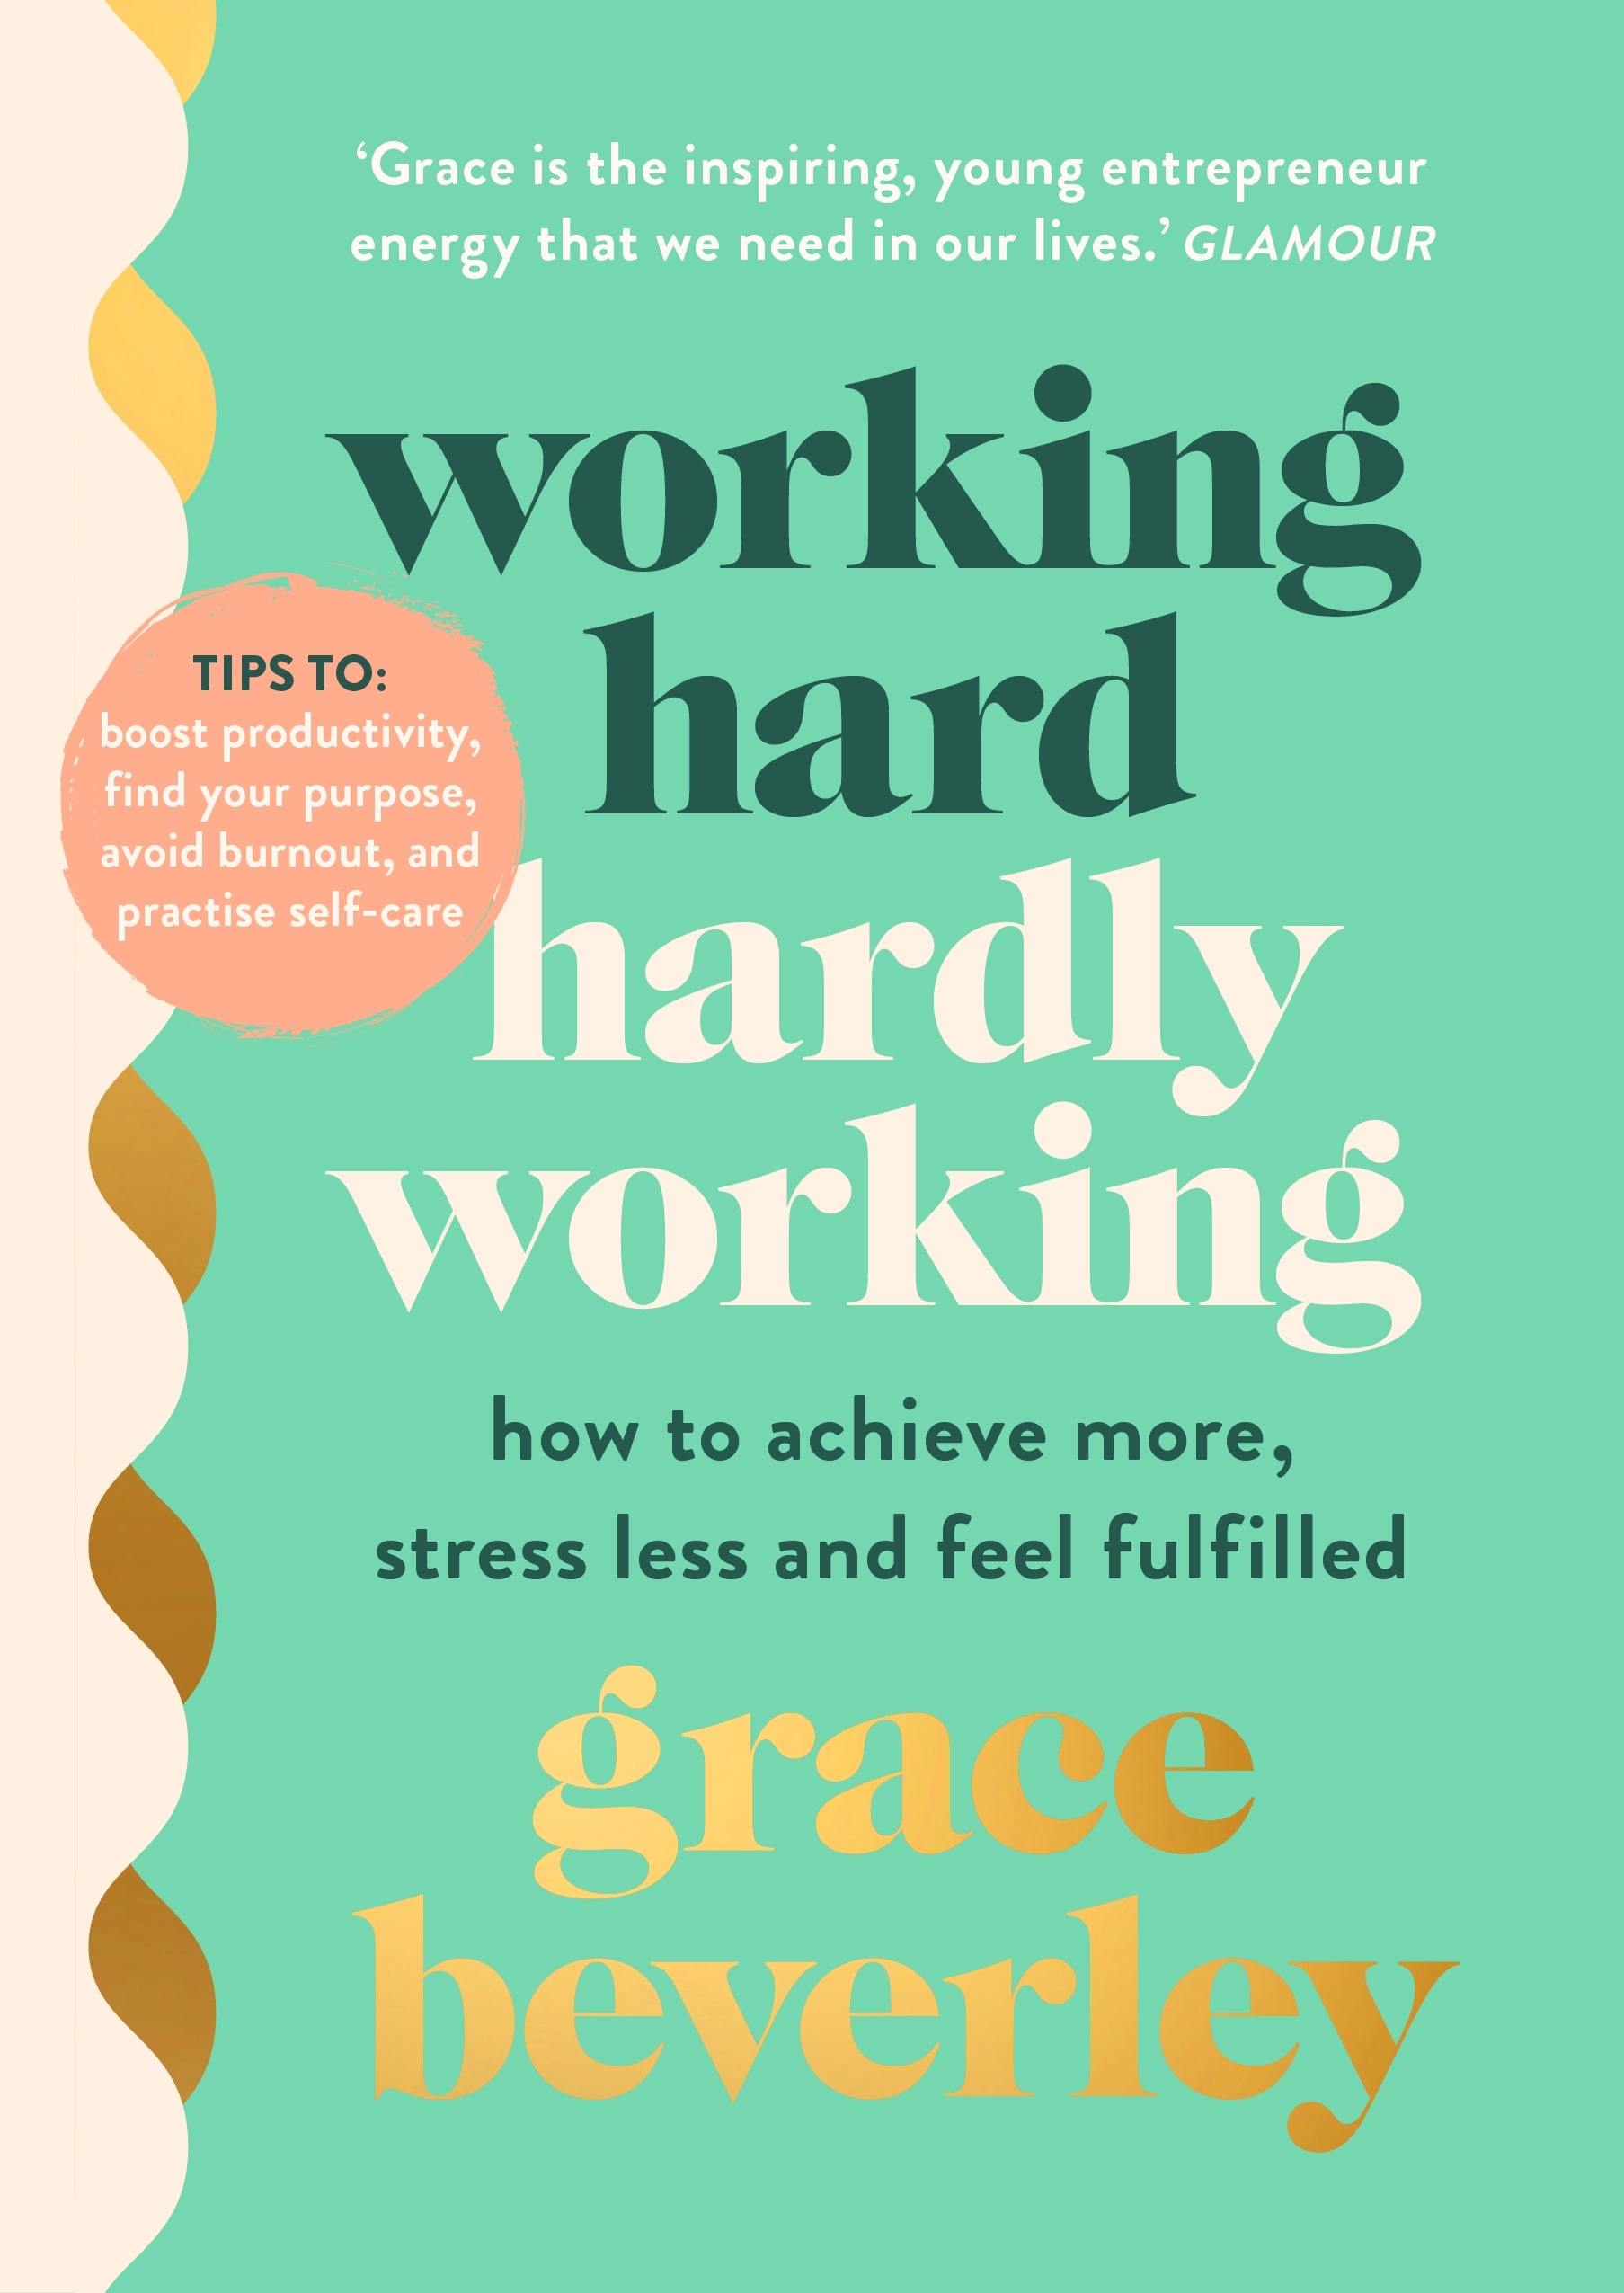 Book “Working Hard, Hardly Working” by Grace Beverley — April 15, 2021